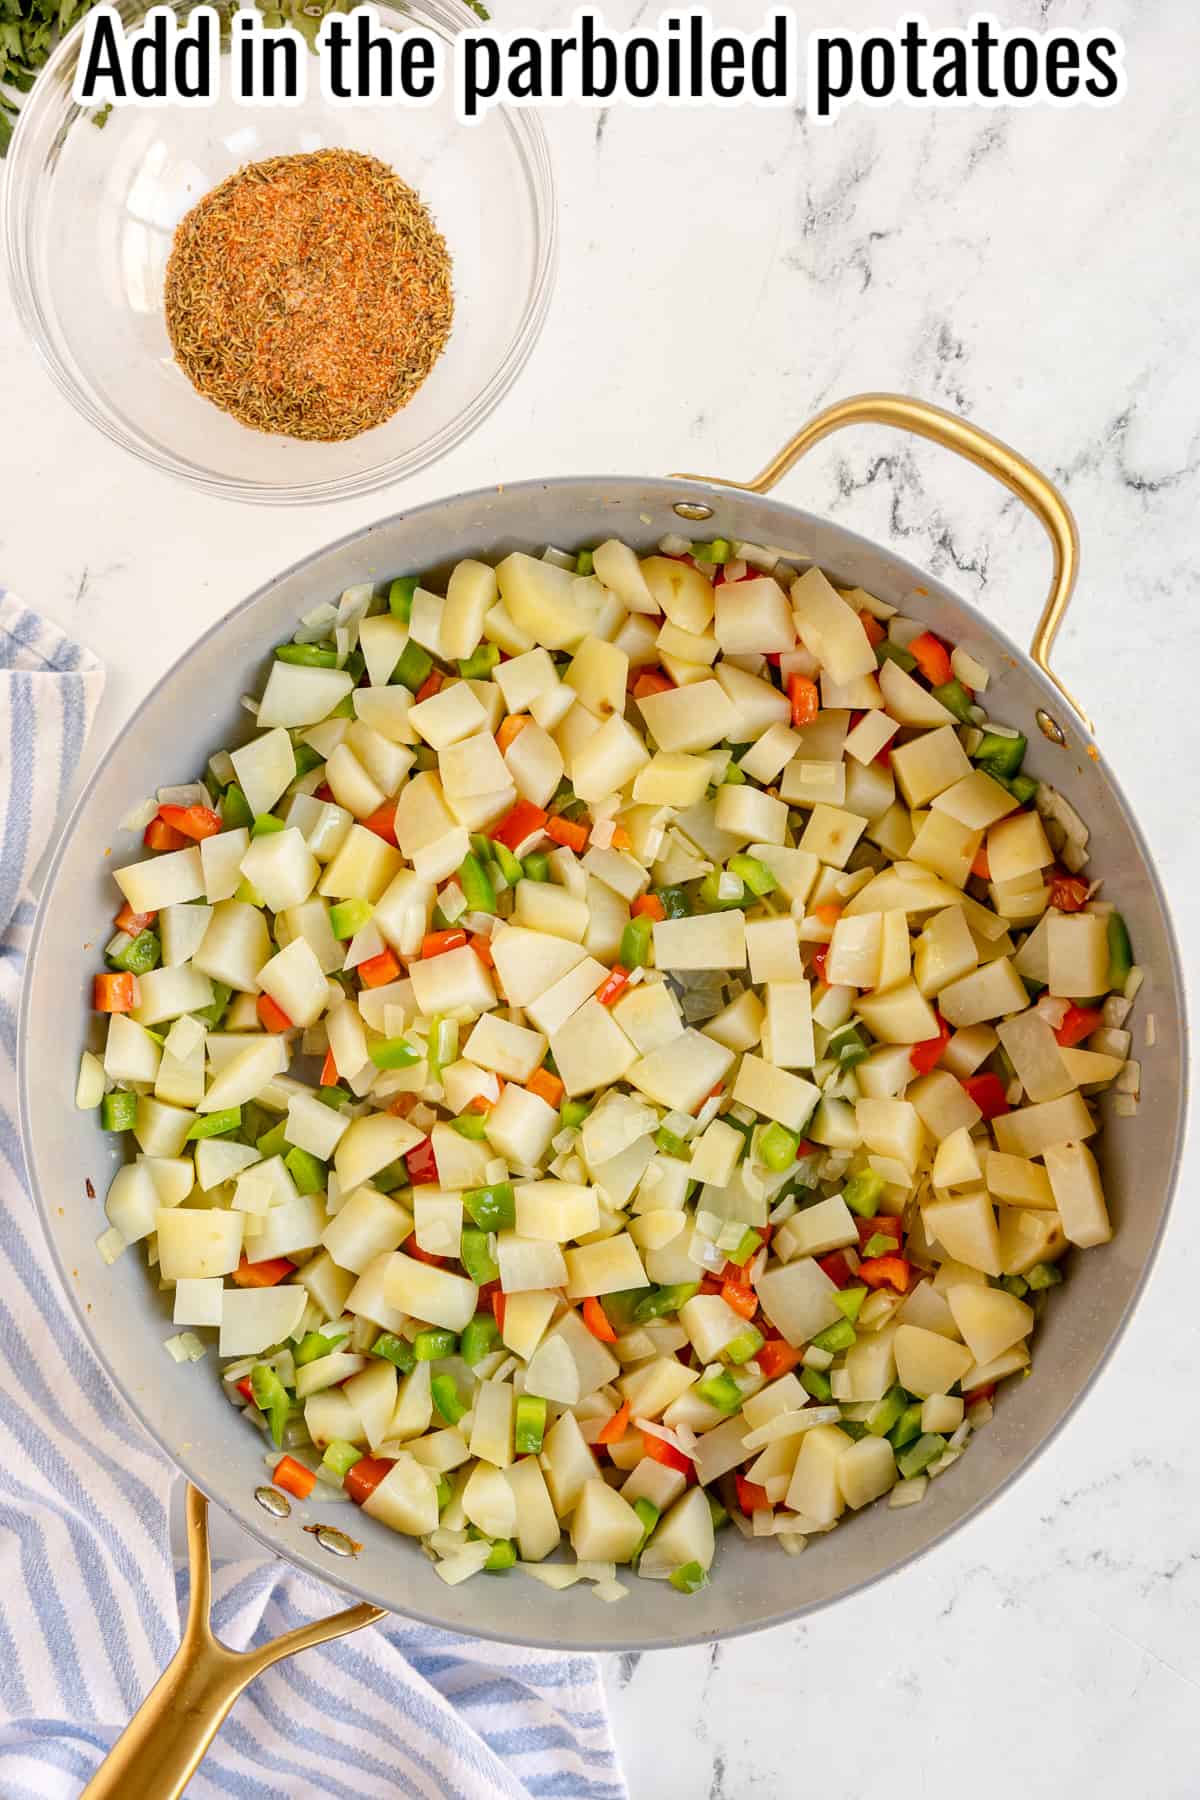 raw potatoes, diced peppers and onions in a skillet.